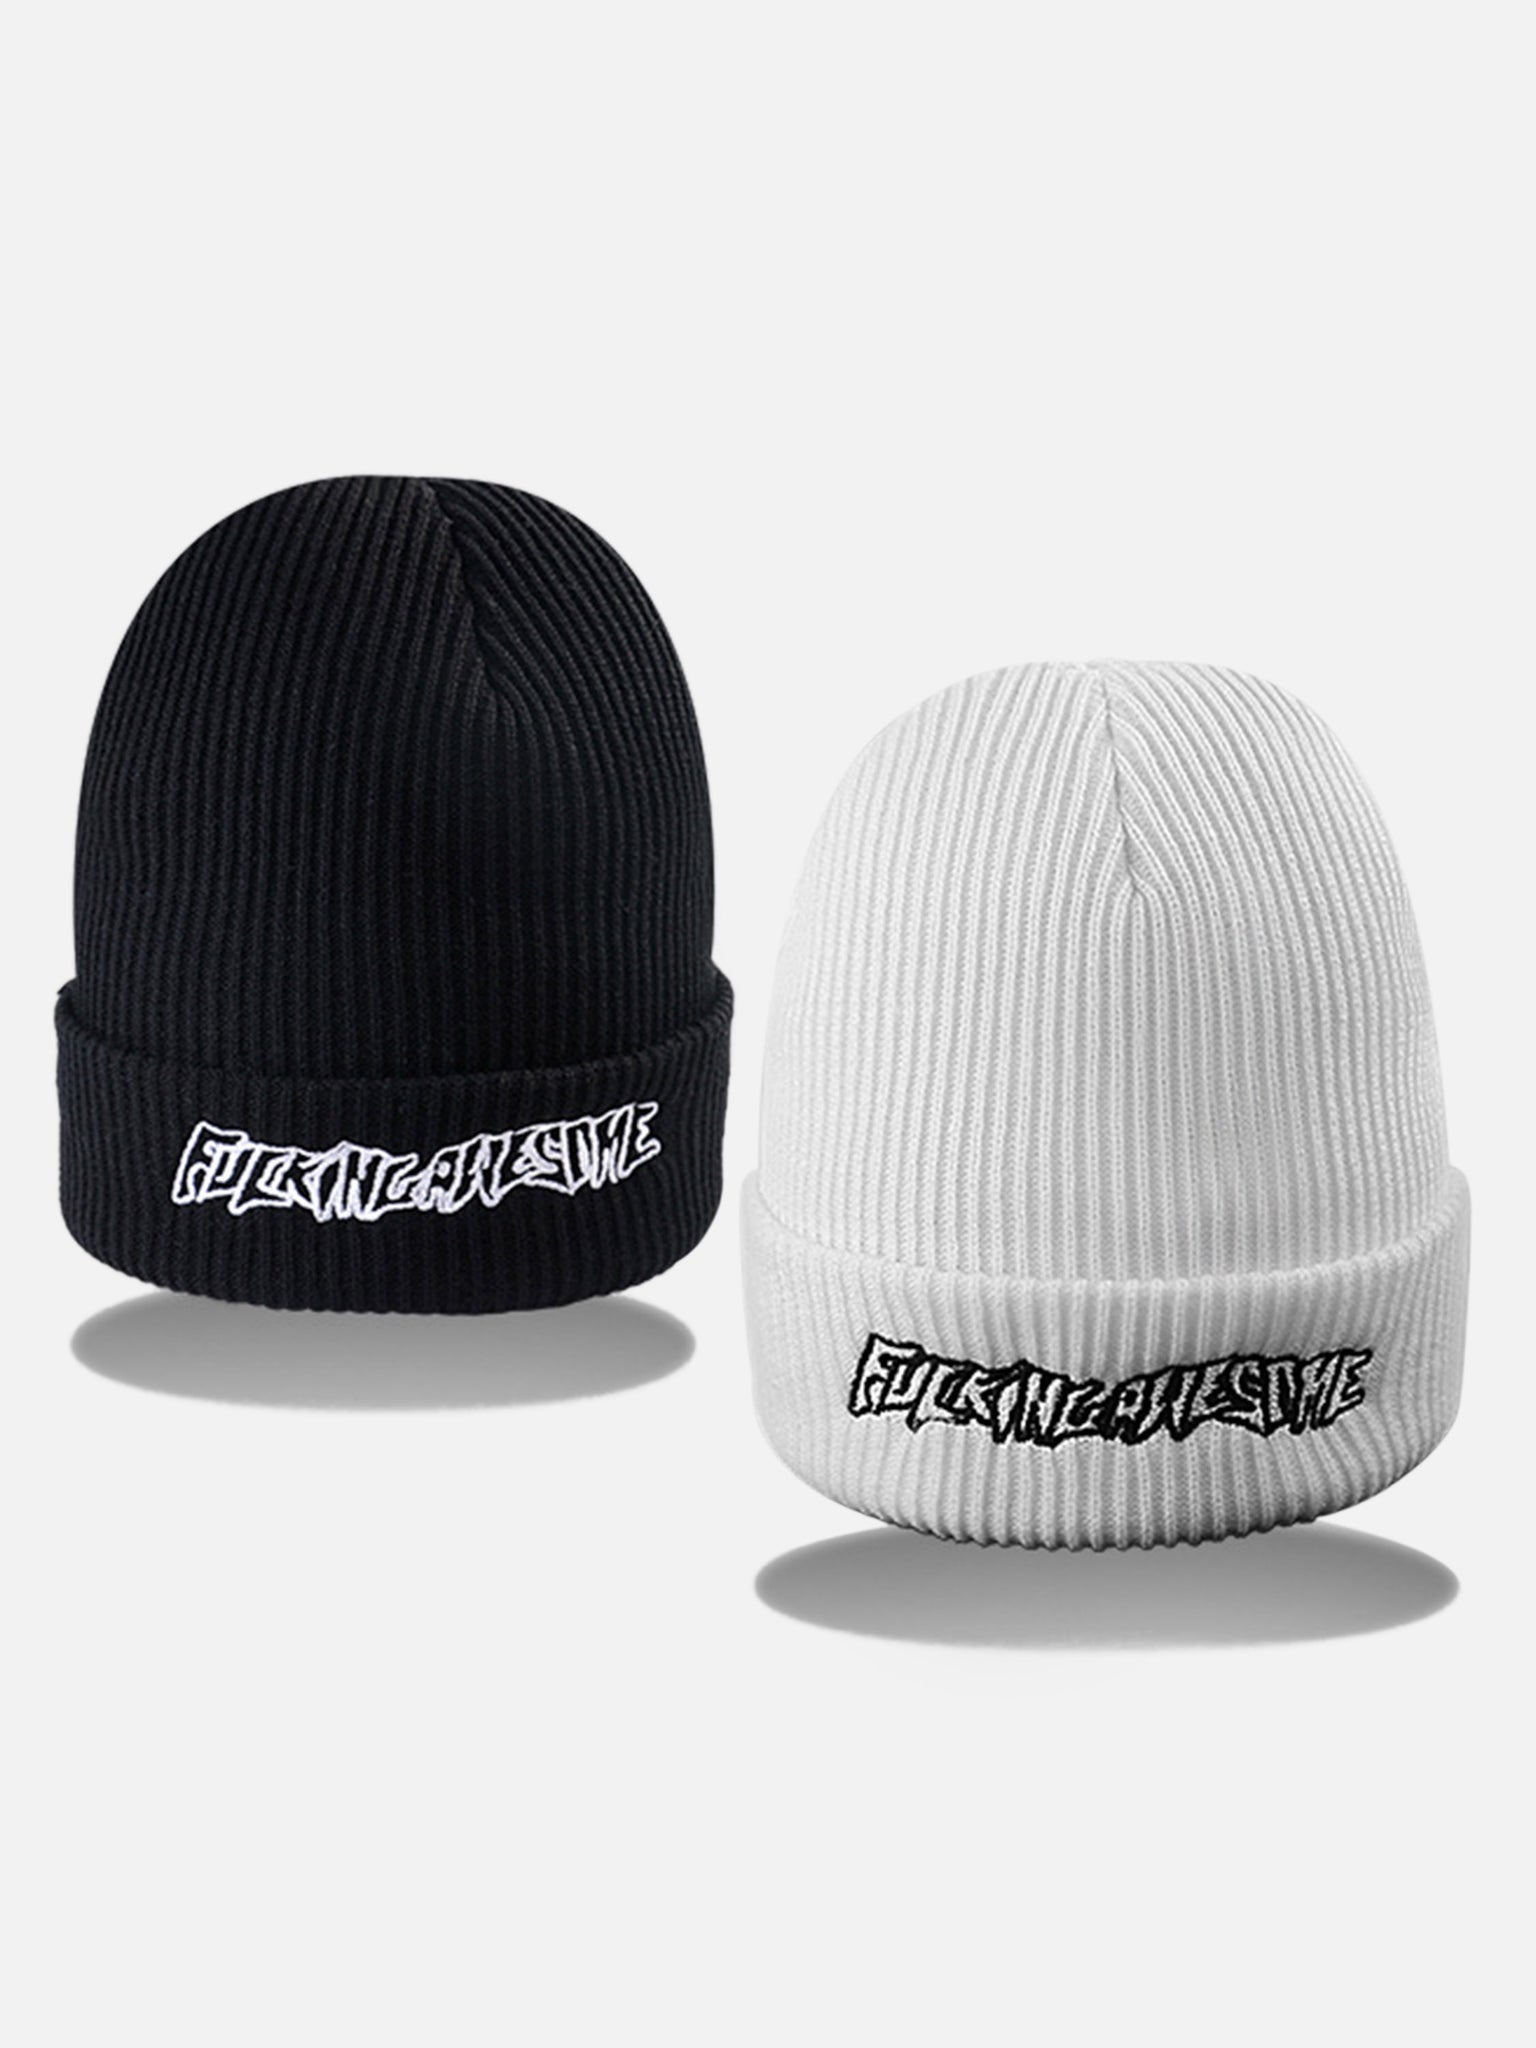 Thesupermade American High Street Retro Tide Knitted Cap Winter